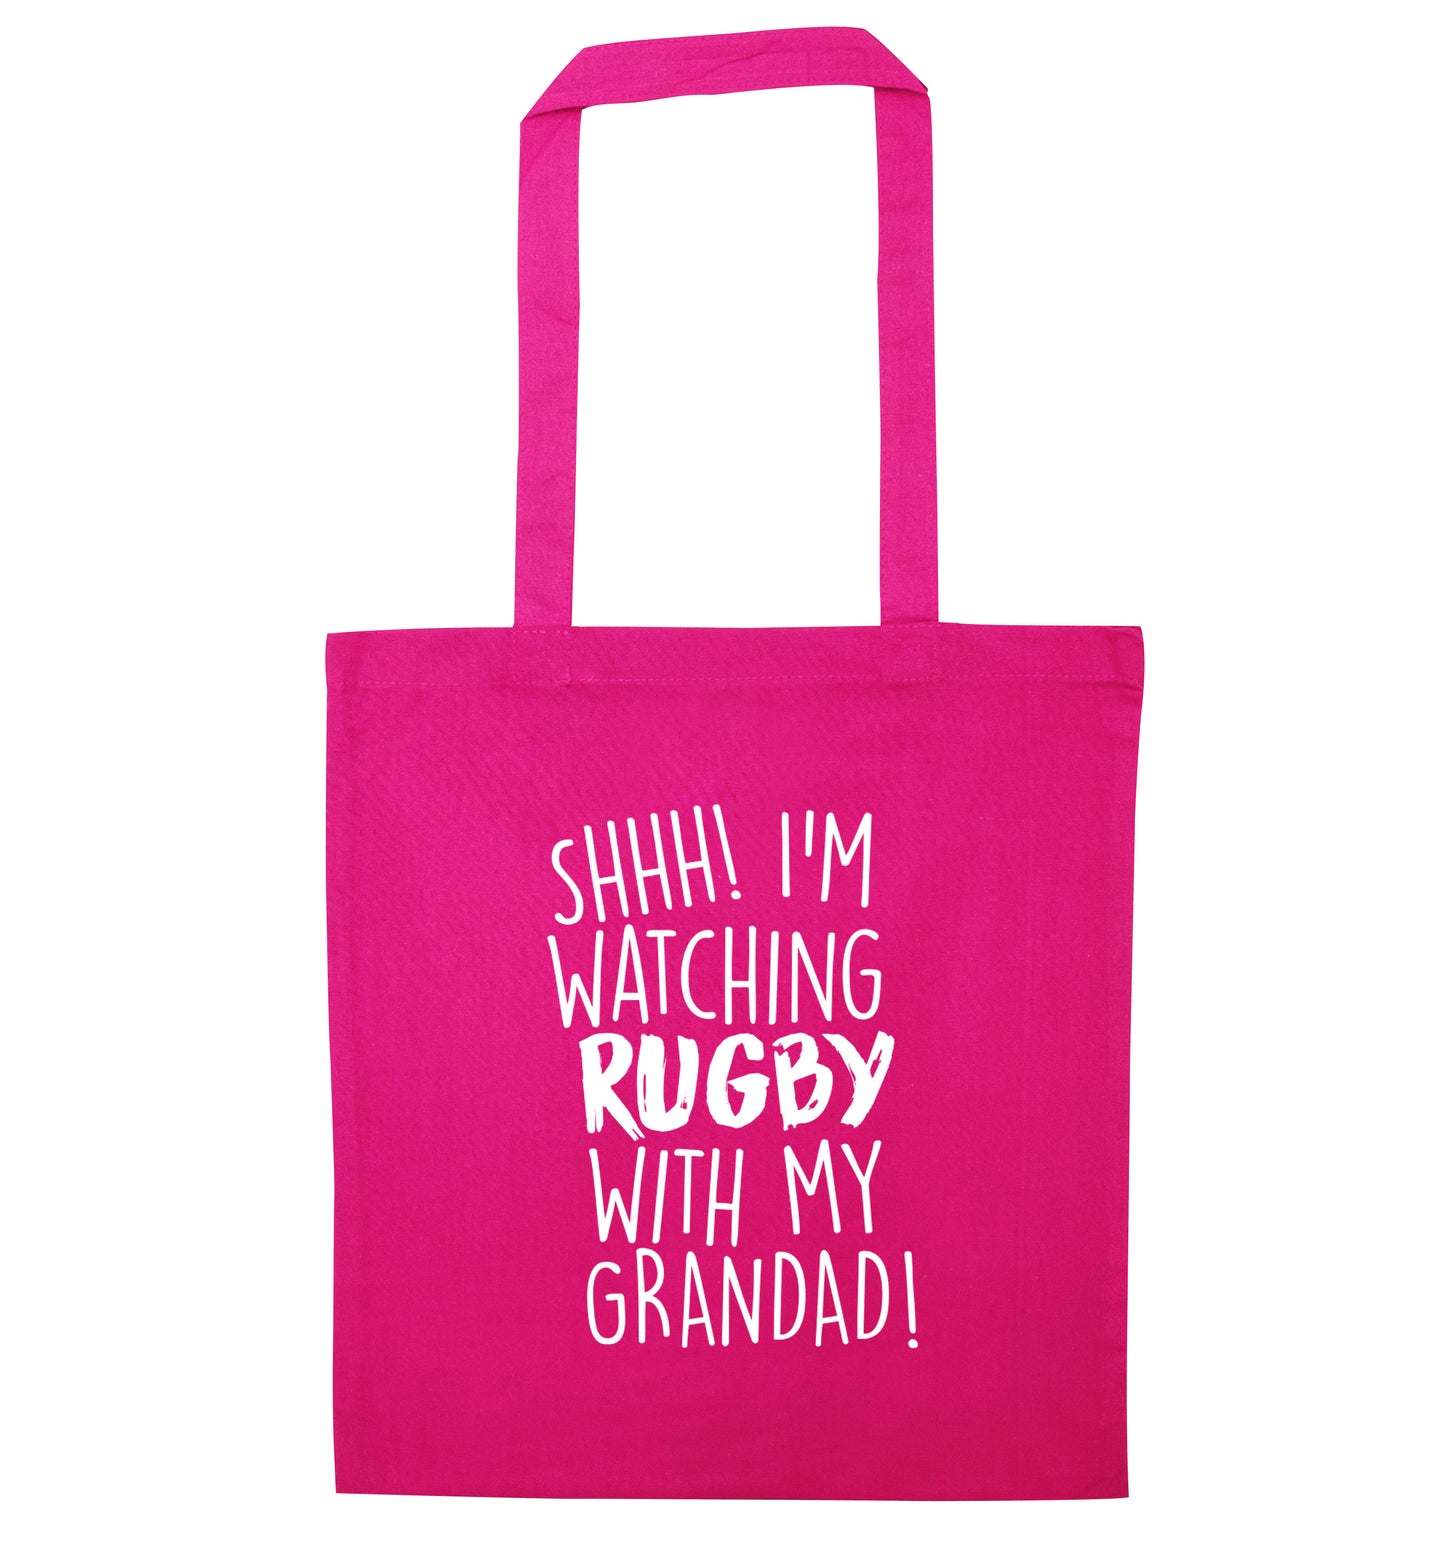 Shh I'm watching rugby with my grandaughter pink tote bag